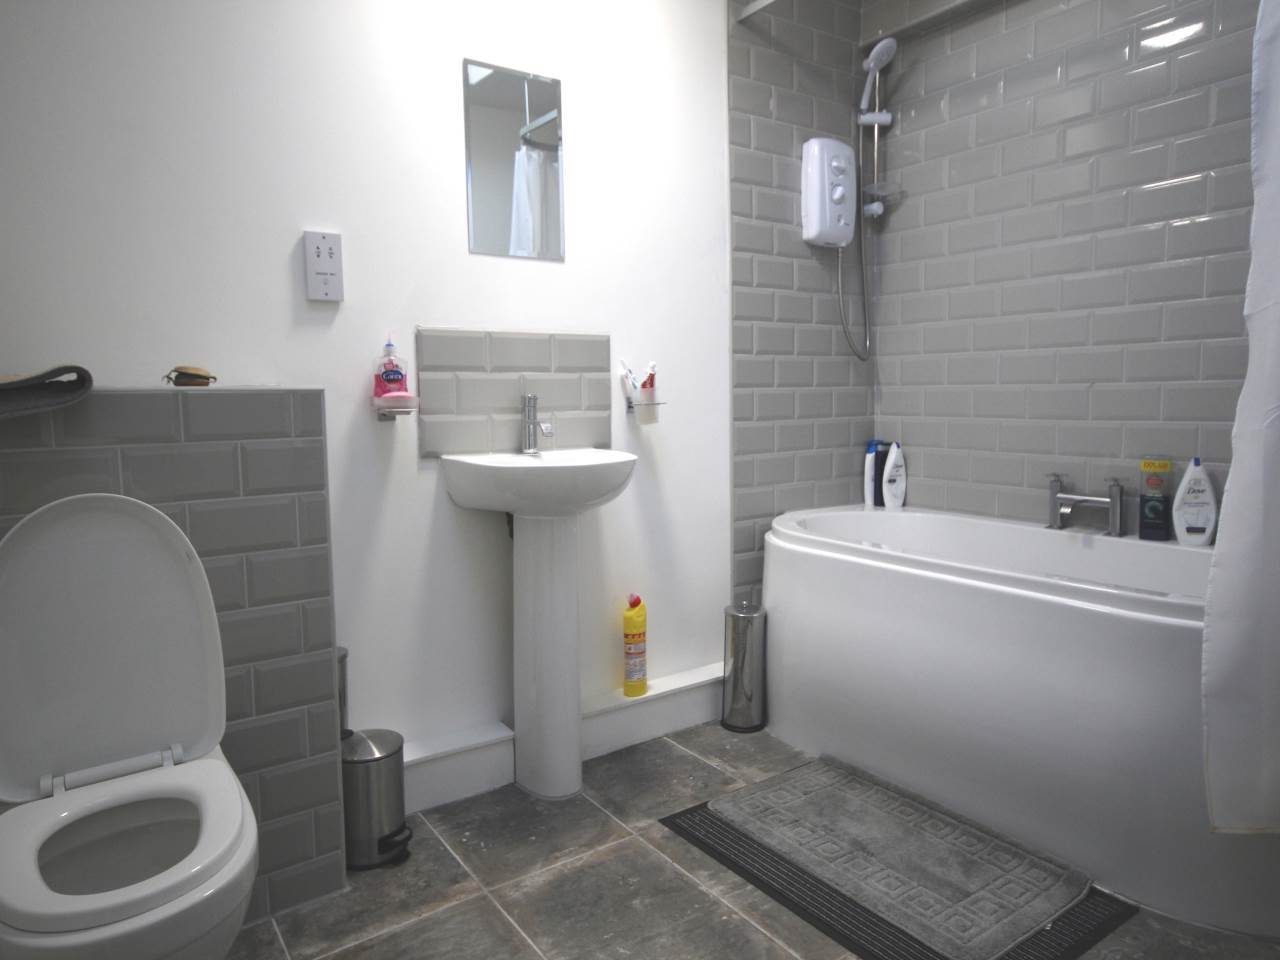 1 bed house / flat share to rent in Grove Terrace  - Property Image 3